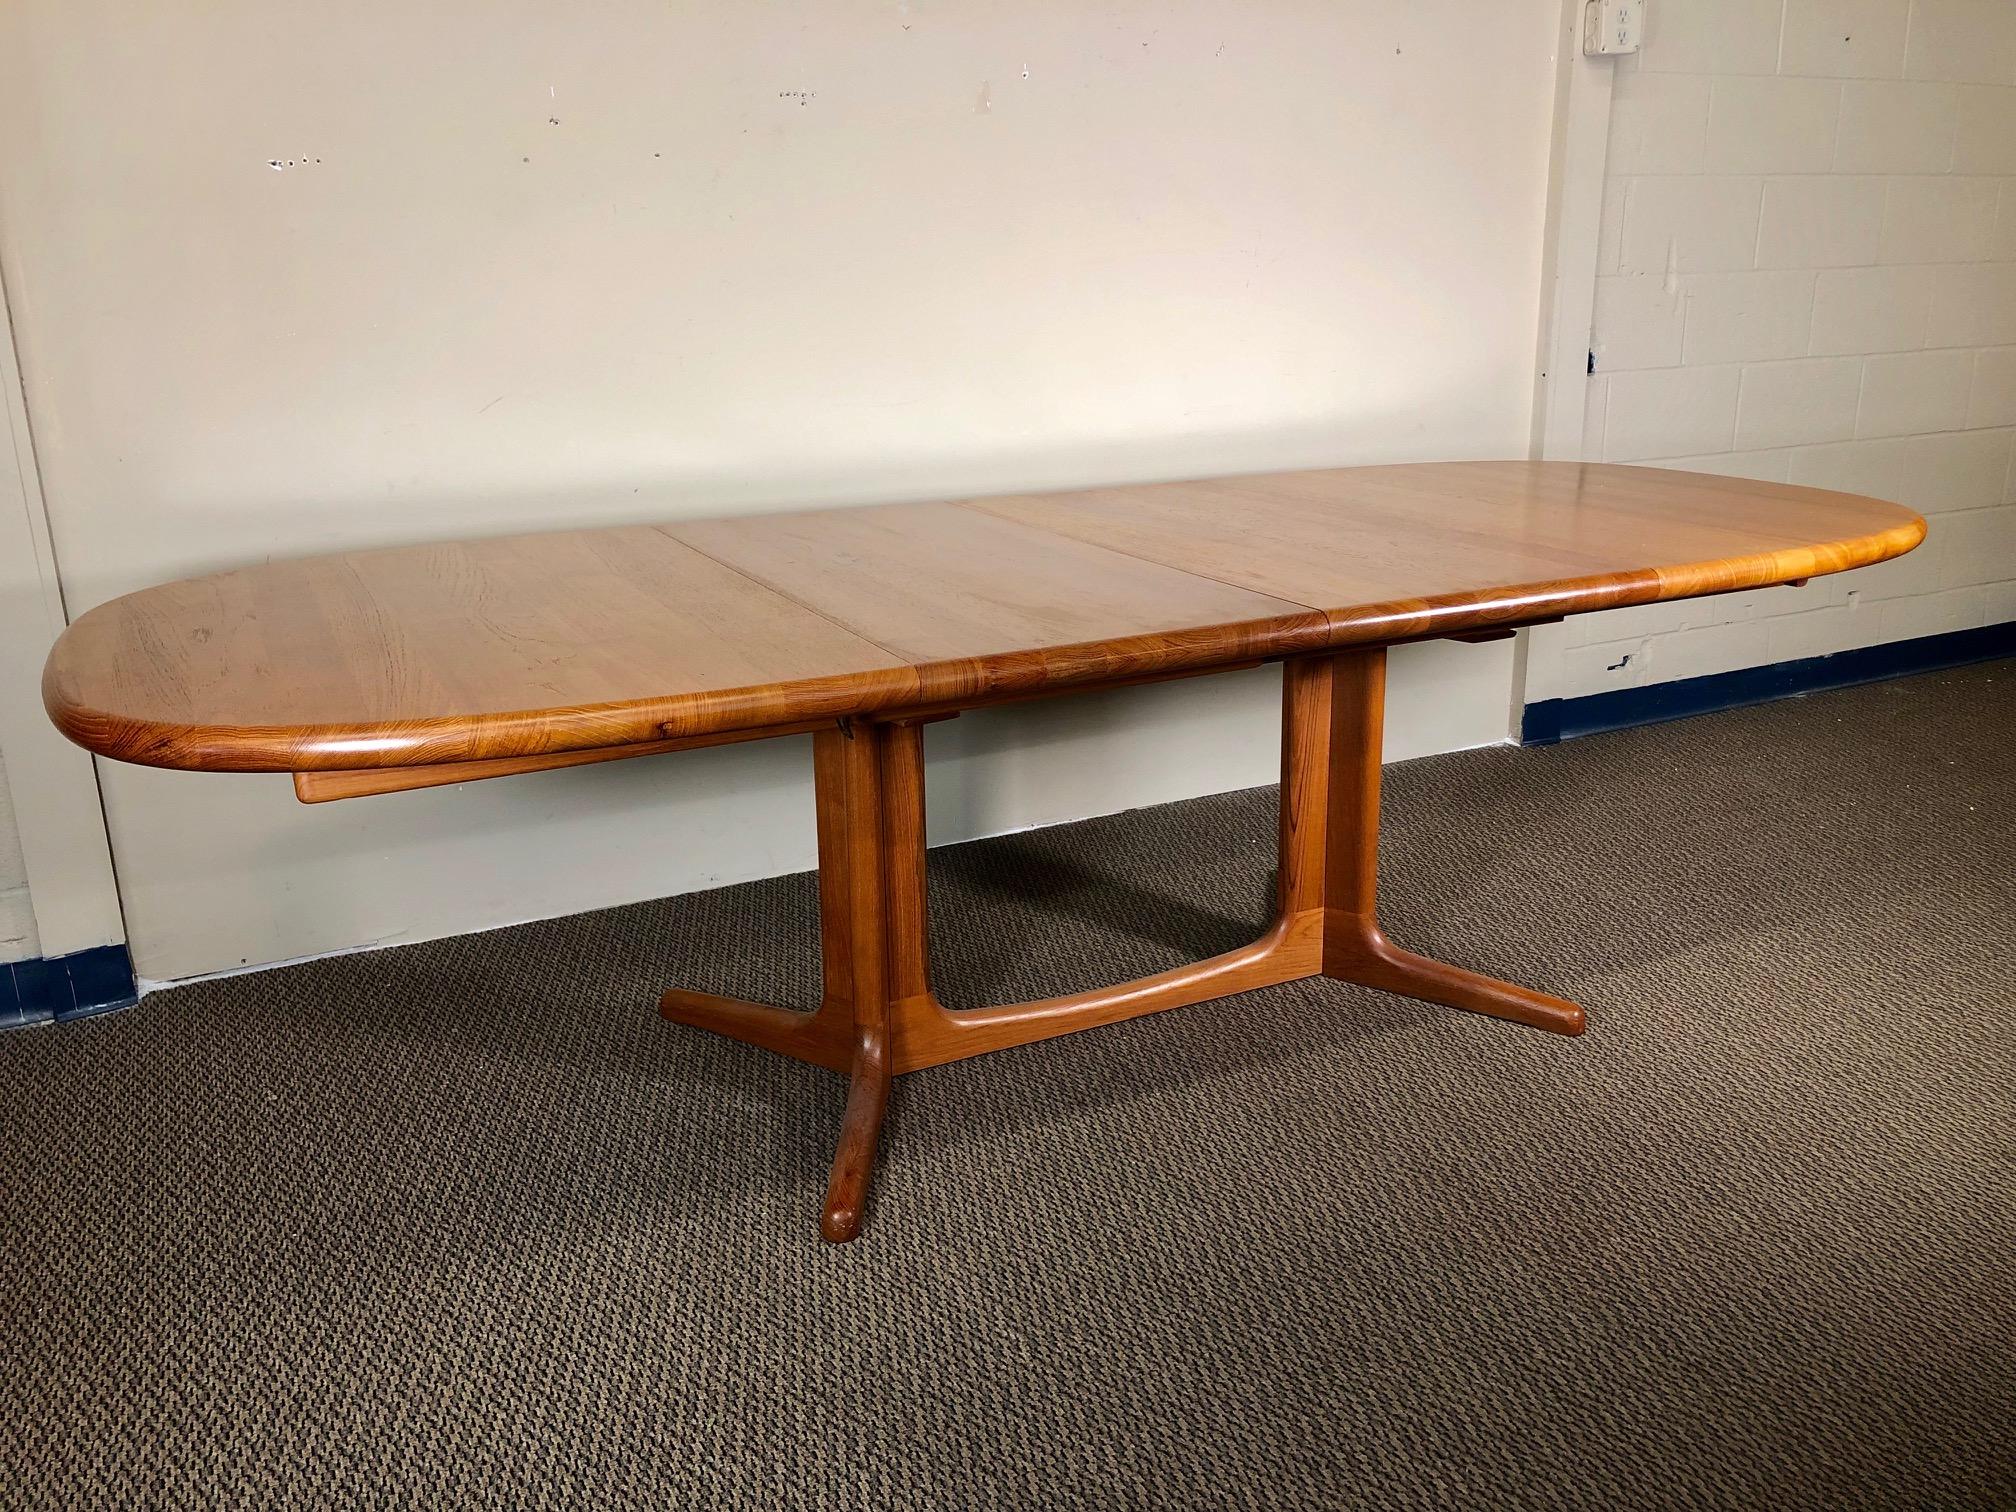 This is a Danish teak dining table with 2 leaves. Made by Glostrup Møbelfabrik. Original label still present. Leaves can be stored inside the table when not in use. The table can be extended with one or with both leaves.

It seats 10 people